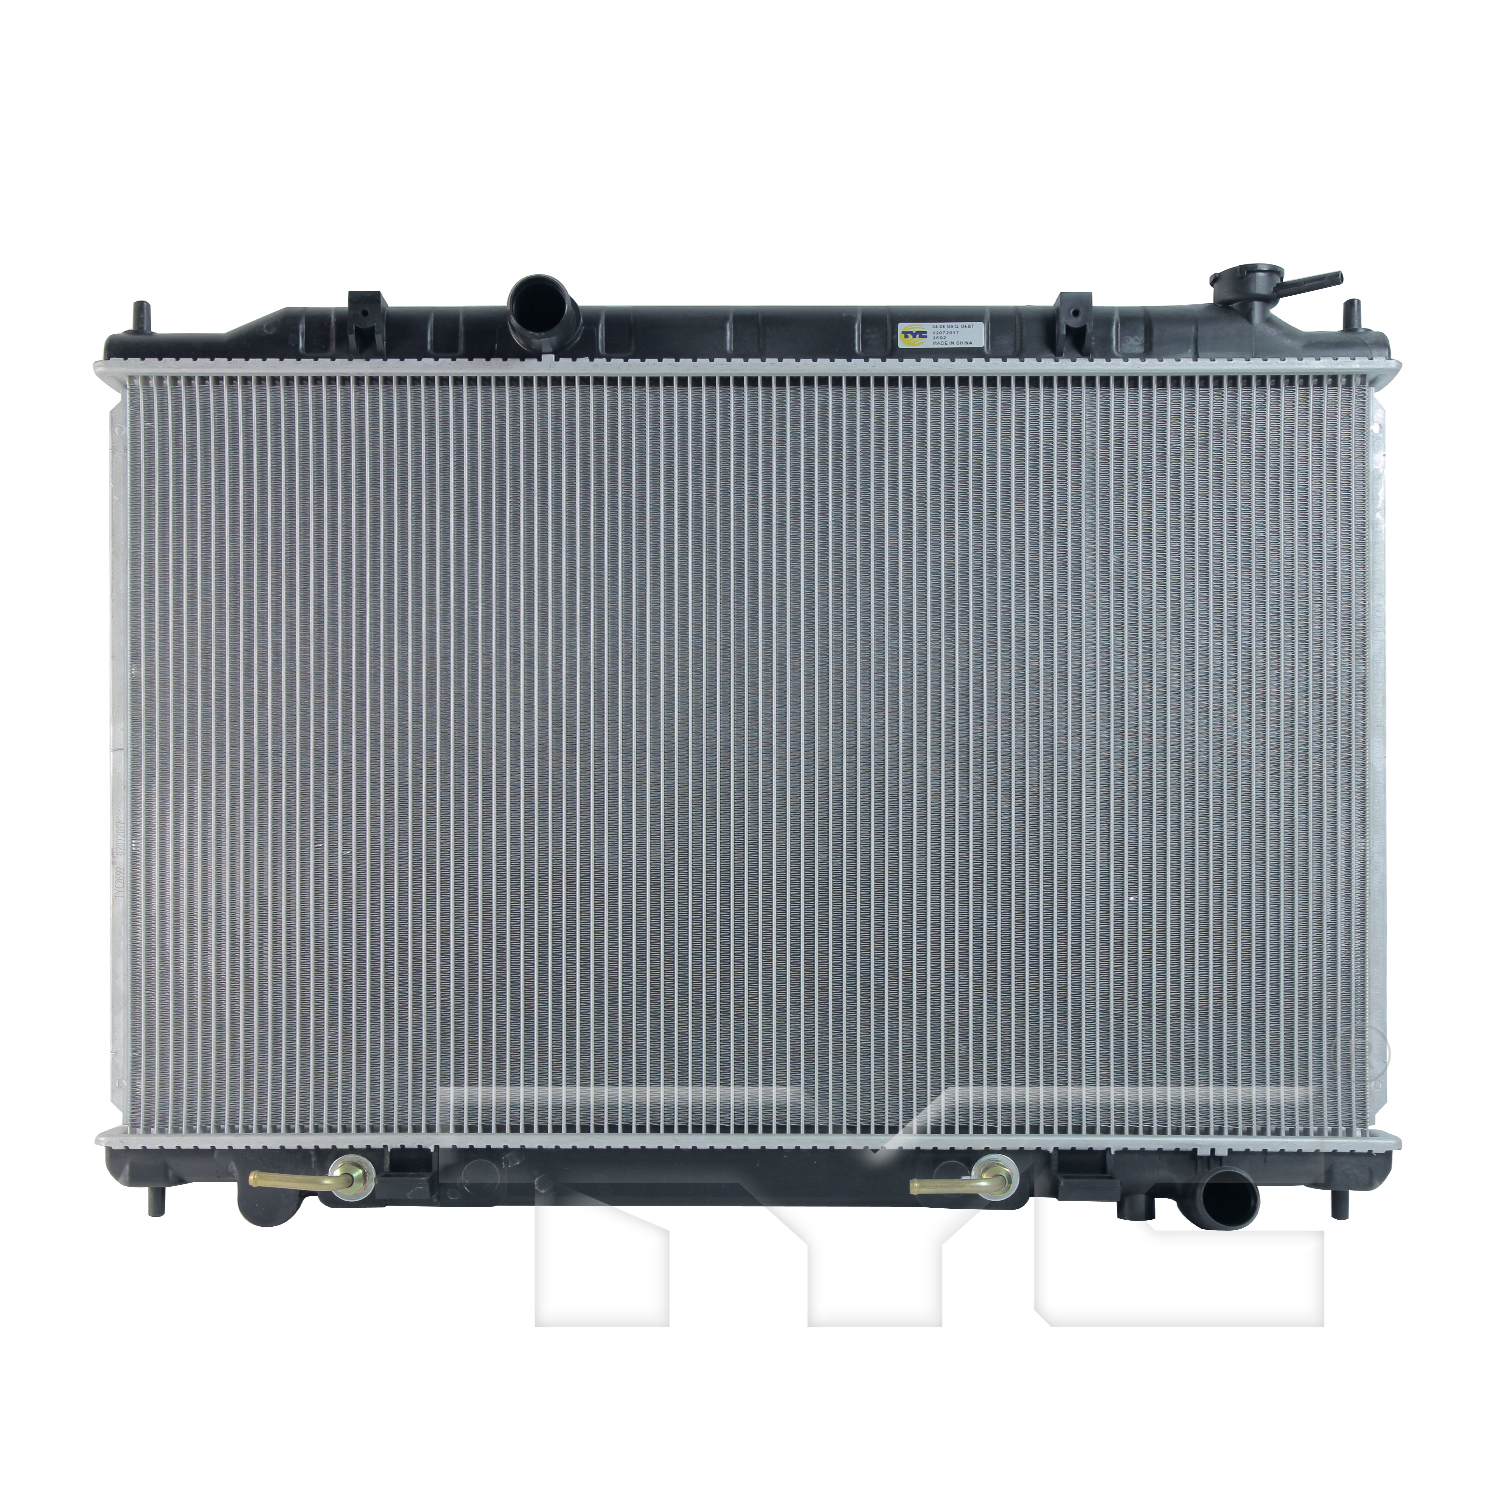 Aftermarket RADIATORS for NISSAN - QUEST, QUEST,04-06,Radiator assembly